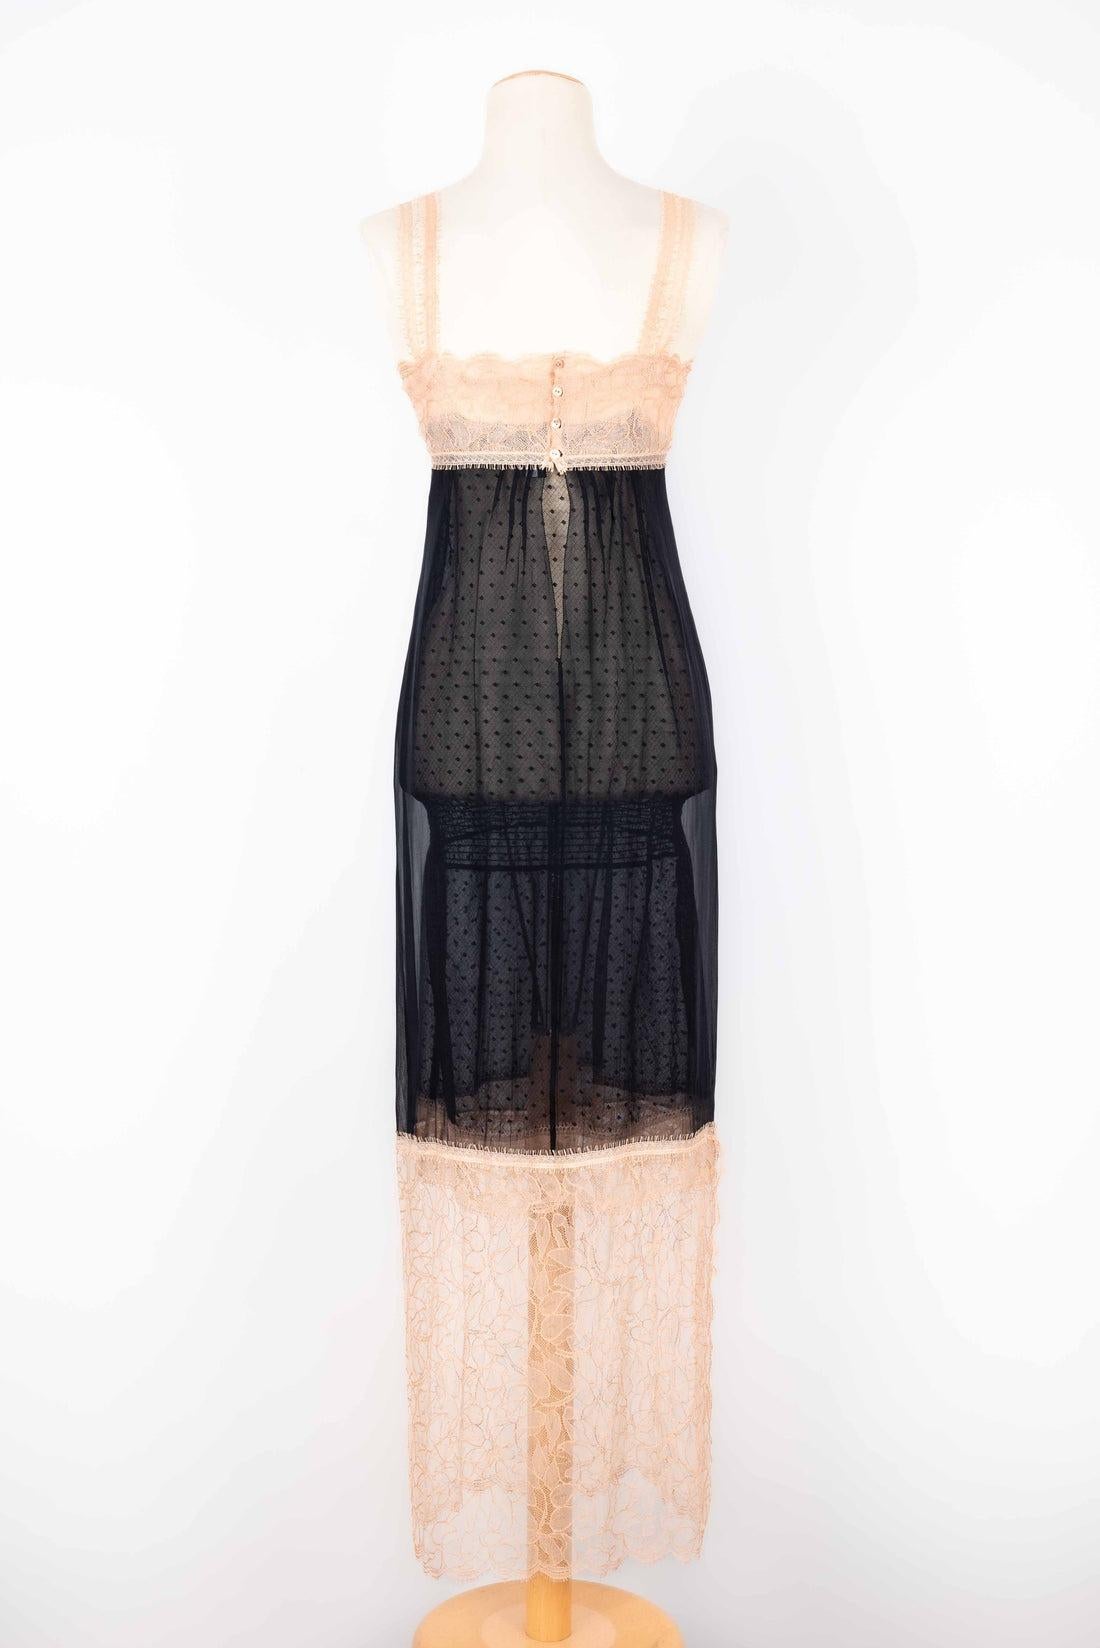 Chanel Babydoll-Style Dress in Black Silk Muslin and Beige Lace, 1990s For Sale 1